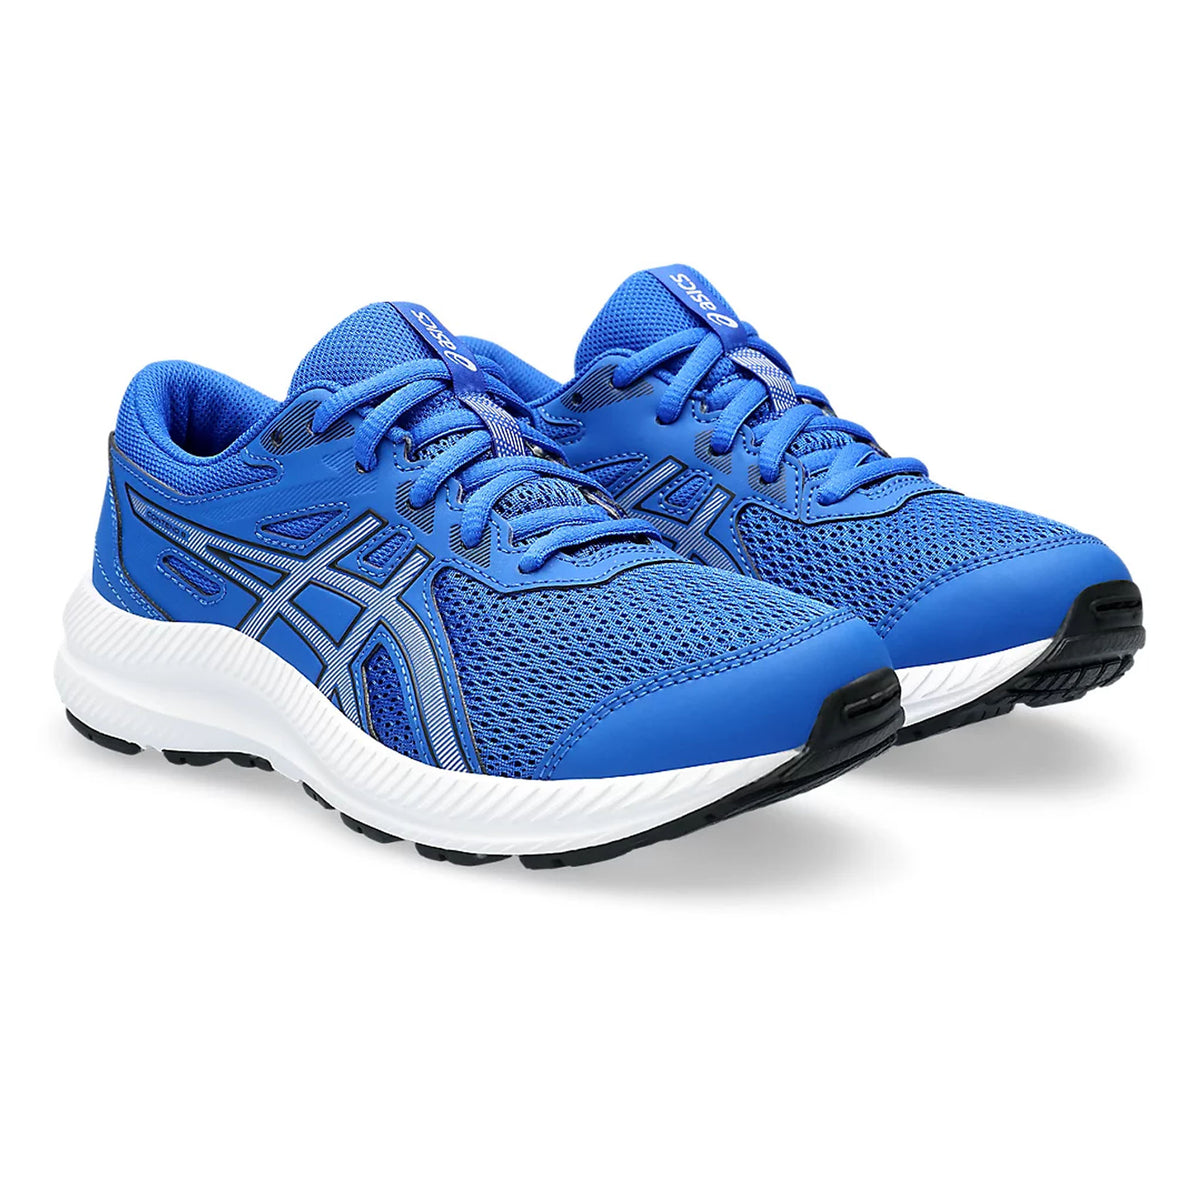 Asics Contend 8 Kids Running Shoes: Illusion Blue/Pure Silver